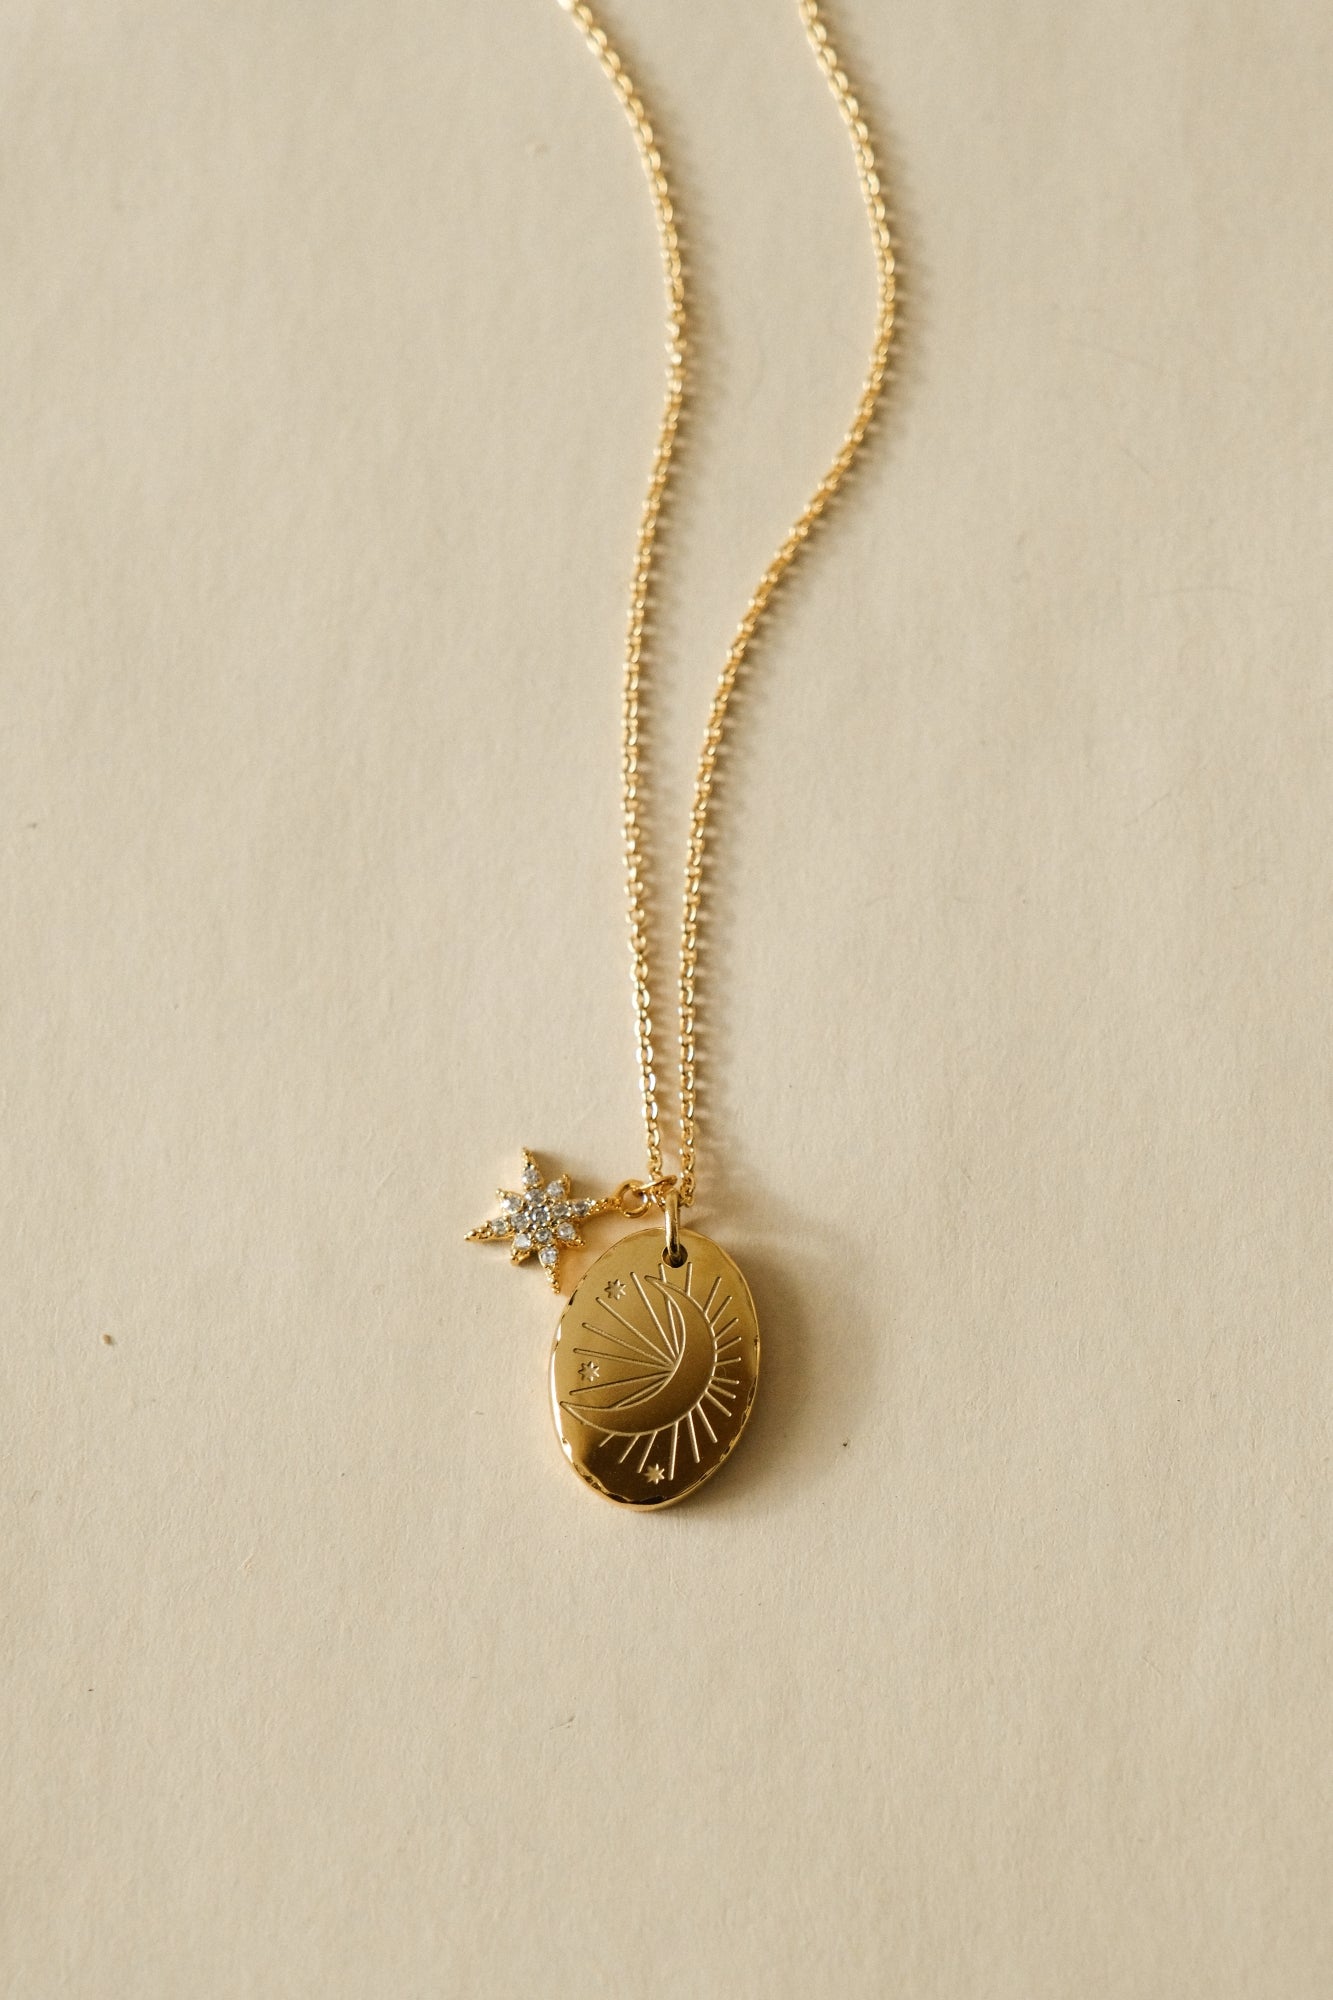 “Mei” necklace (of your choice)